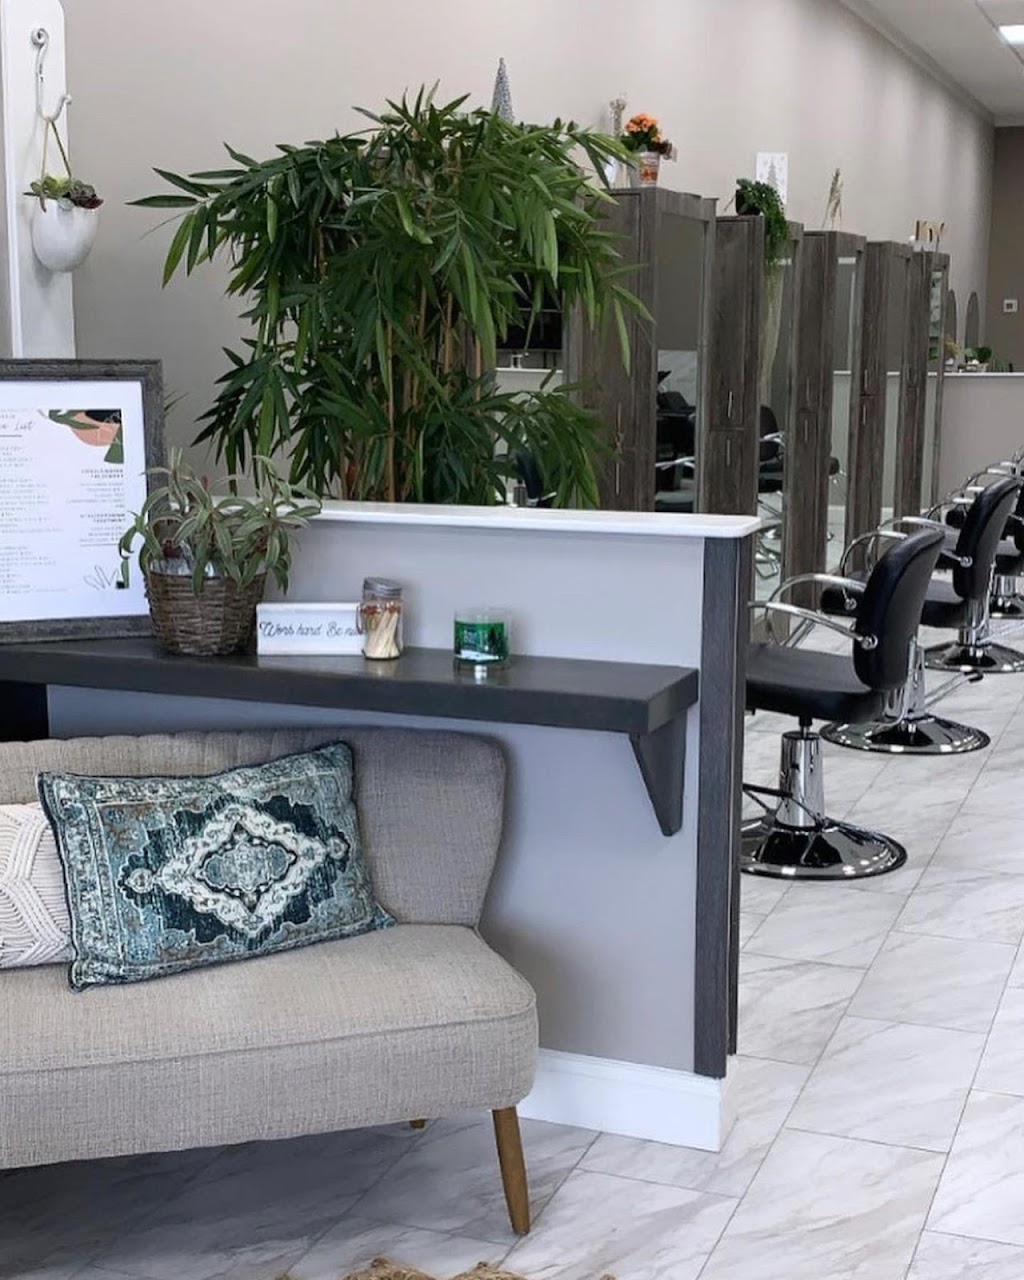 Menlo Unisex Salon Moved to Pro Hair Fords | 39 Lafayette Rd, Fords, NJ 08863 | Phone: (732) 548-3600